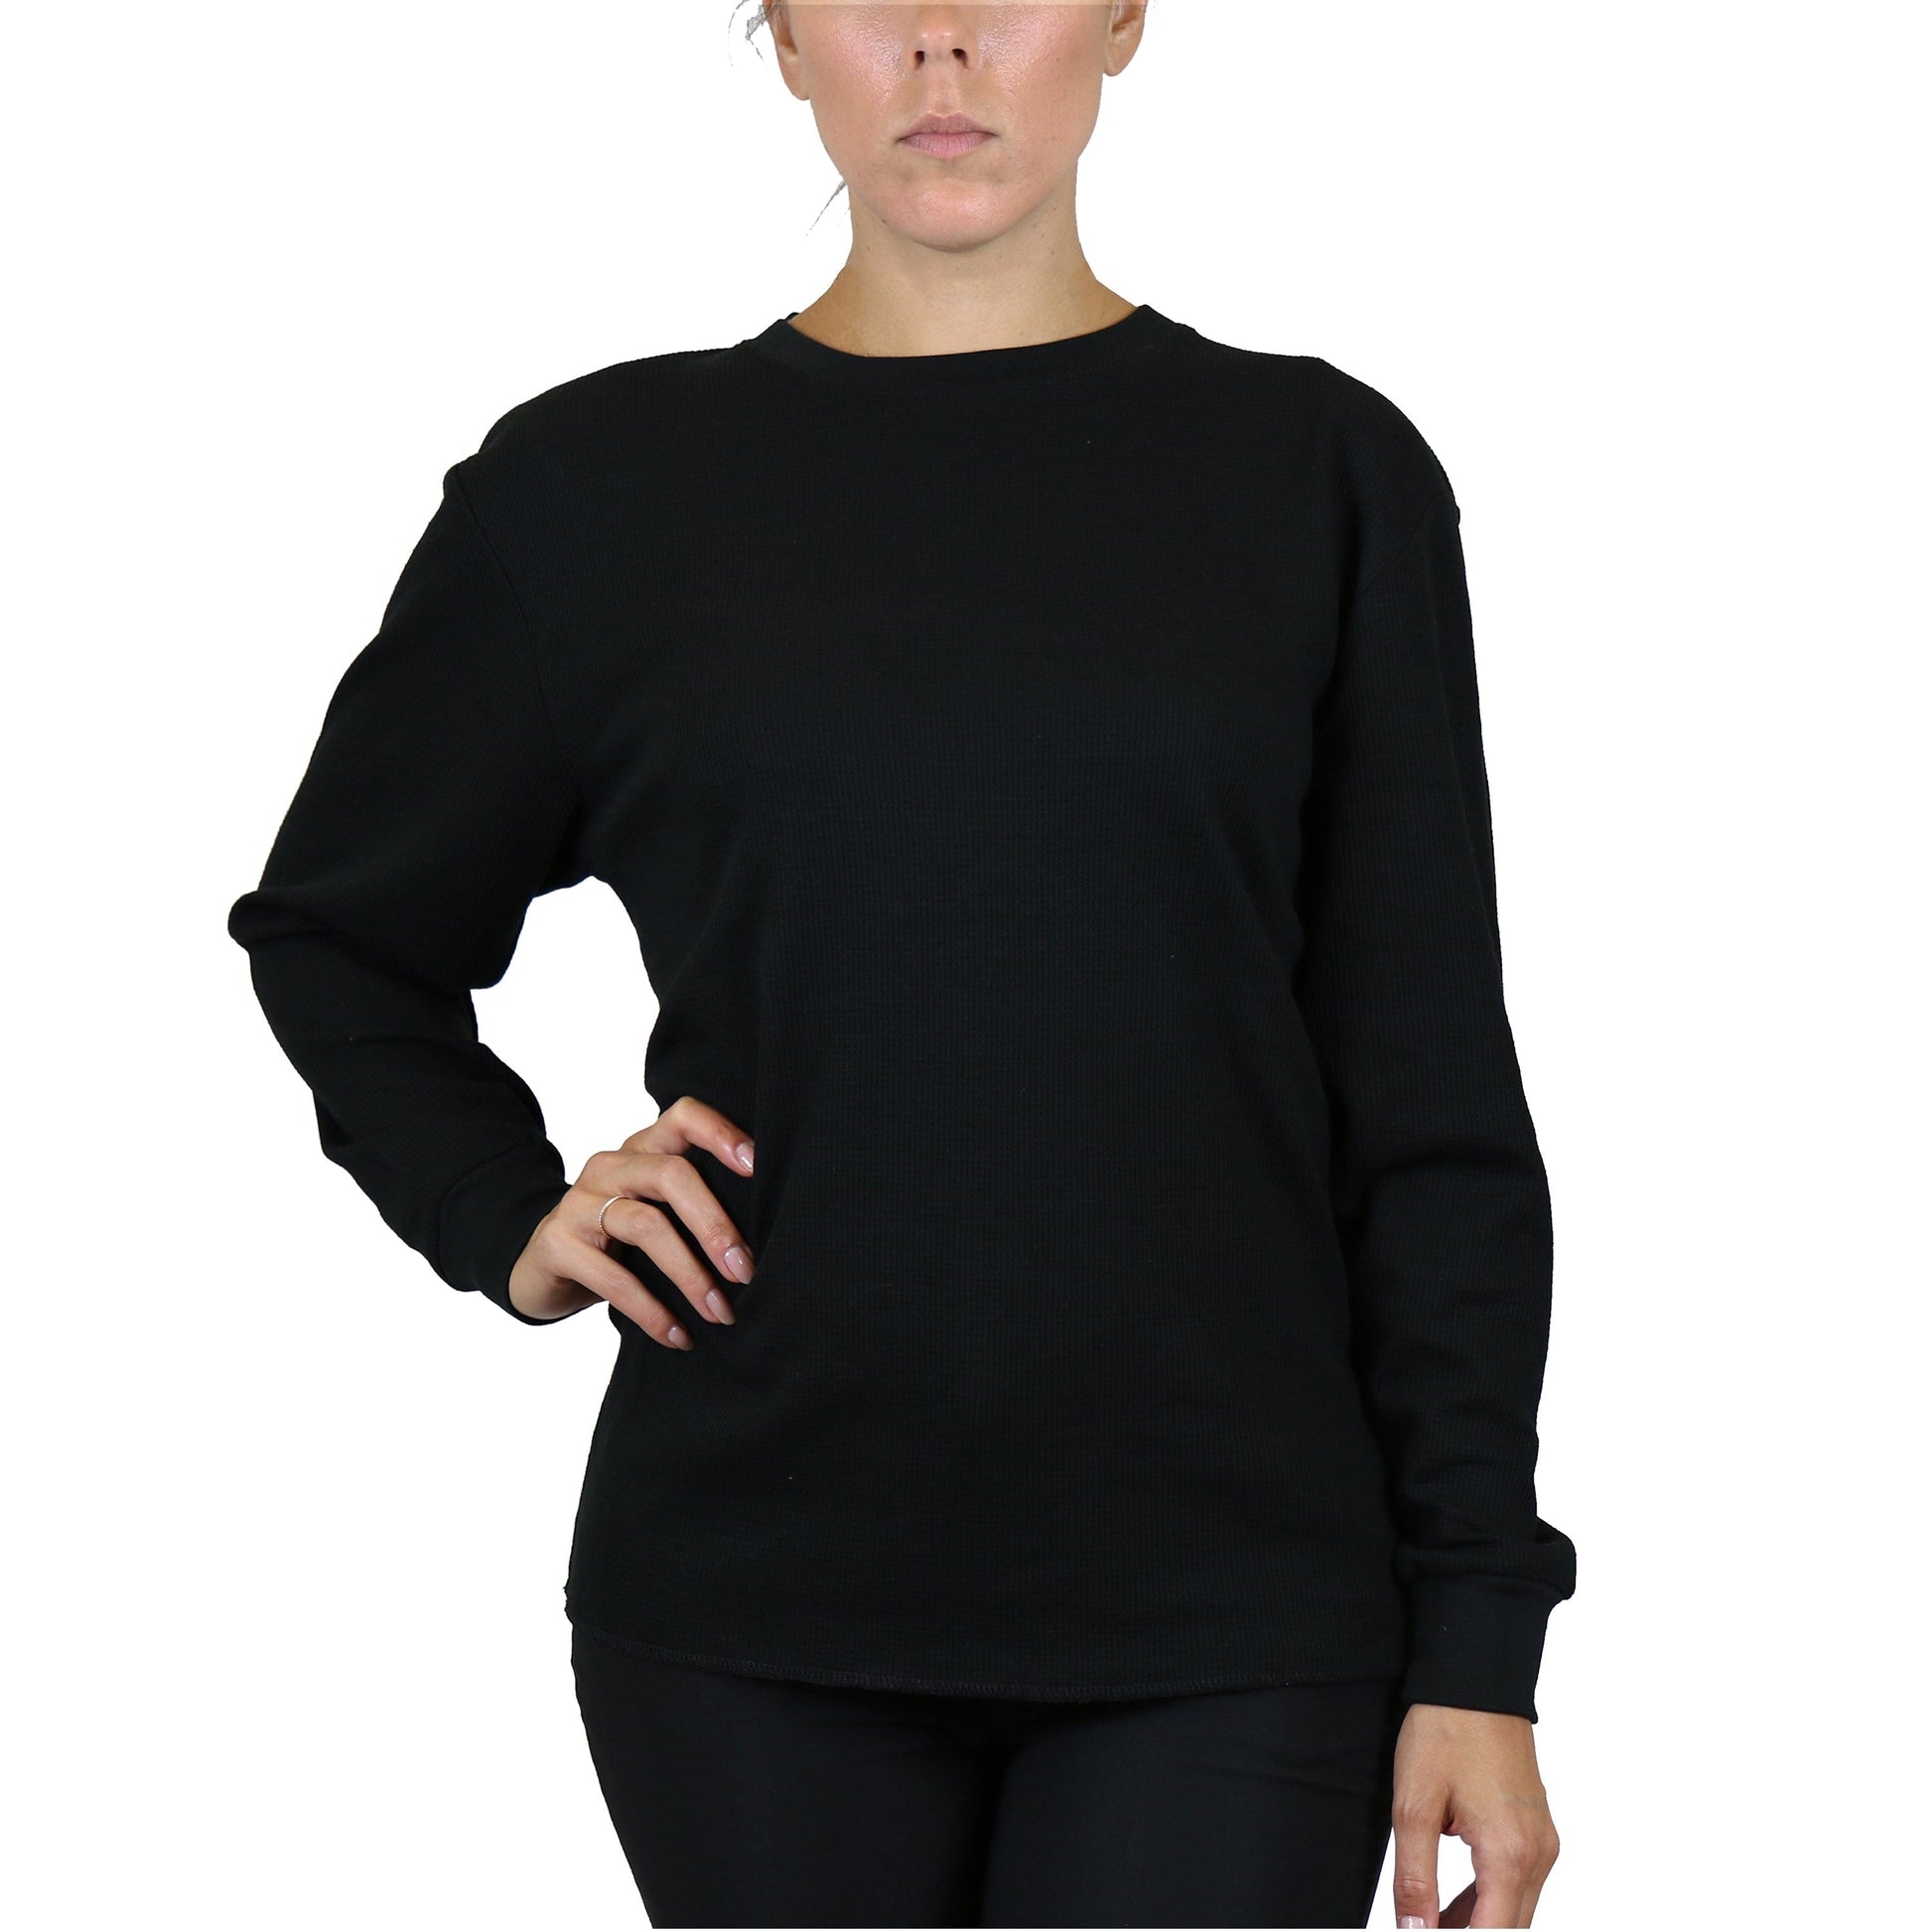 Women's Long Sleeve Oversize Loose Fit Thermal Shirts (Sizes, S